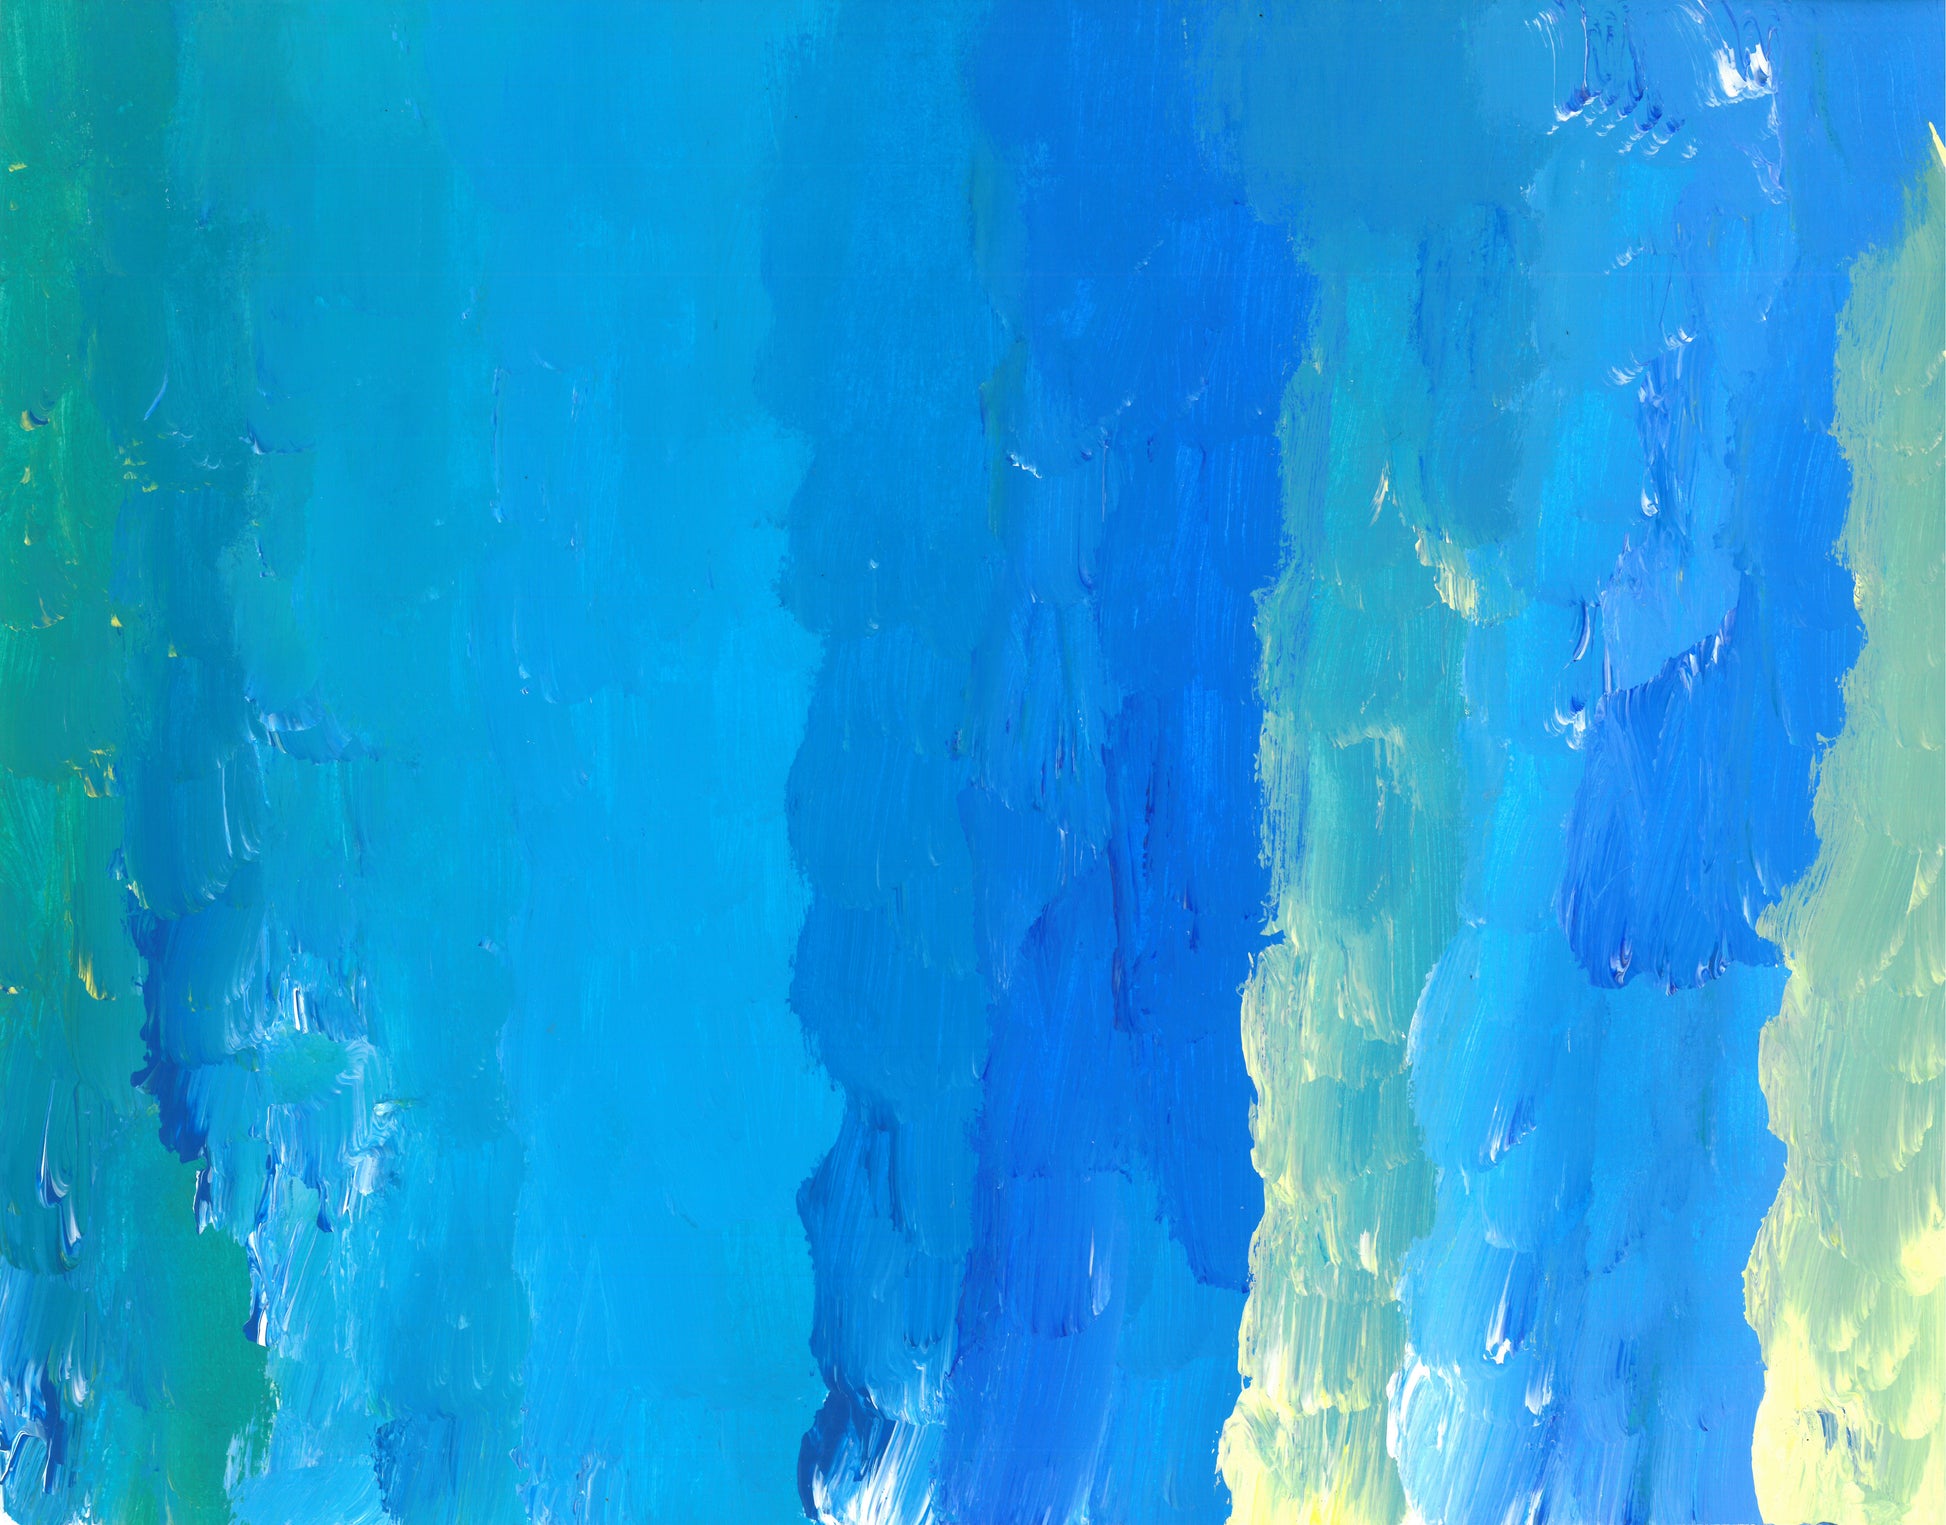 Acrylic on paper artwork of vertical gradient shades of blue and green